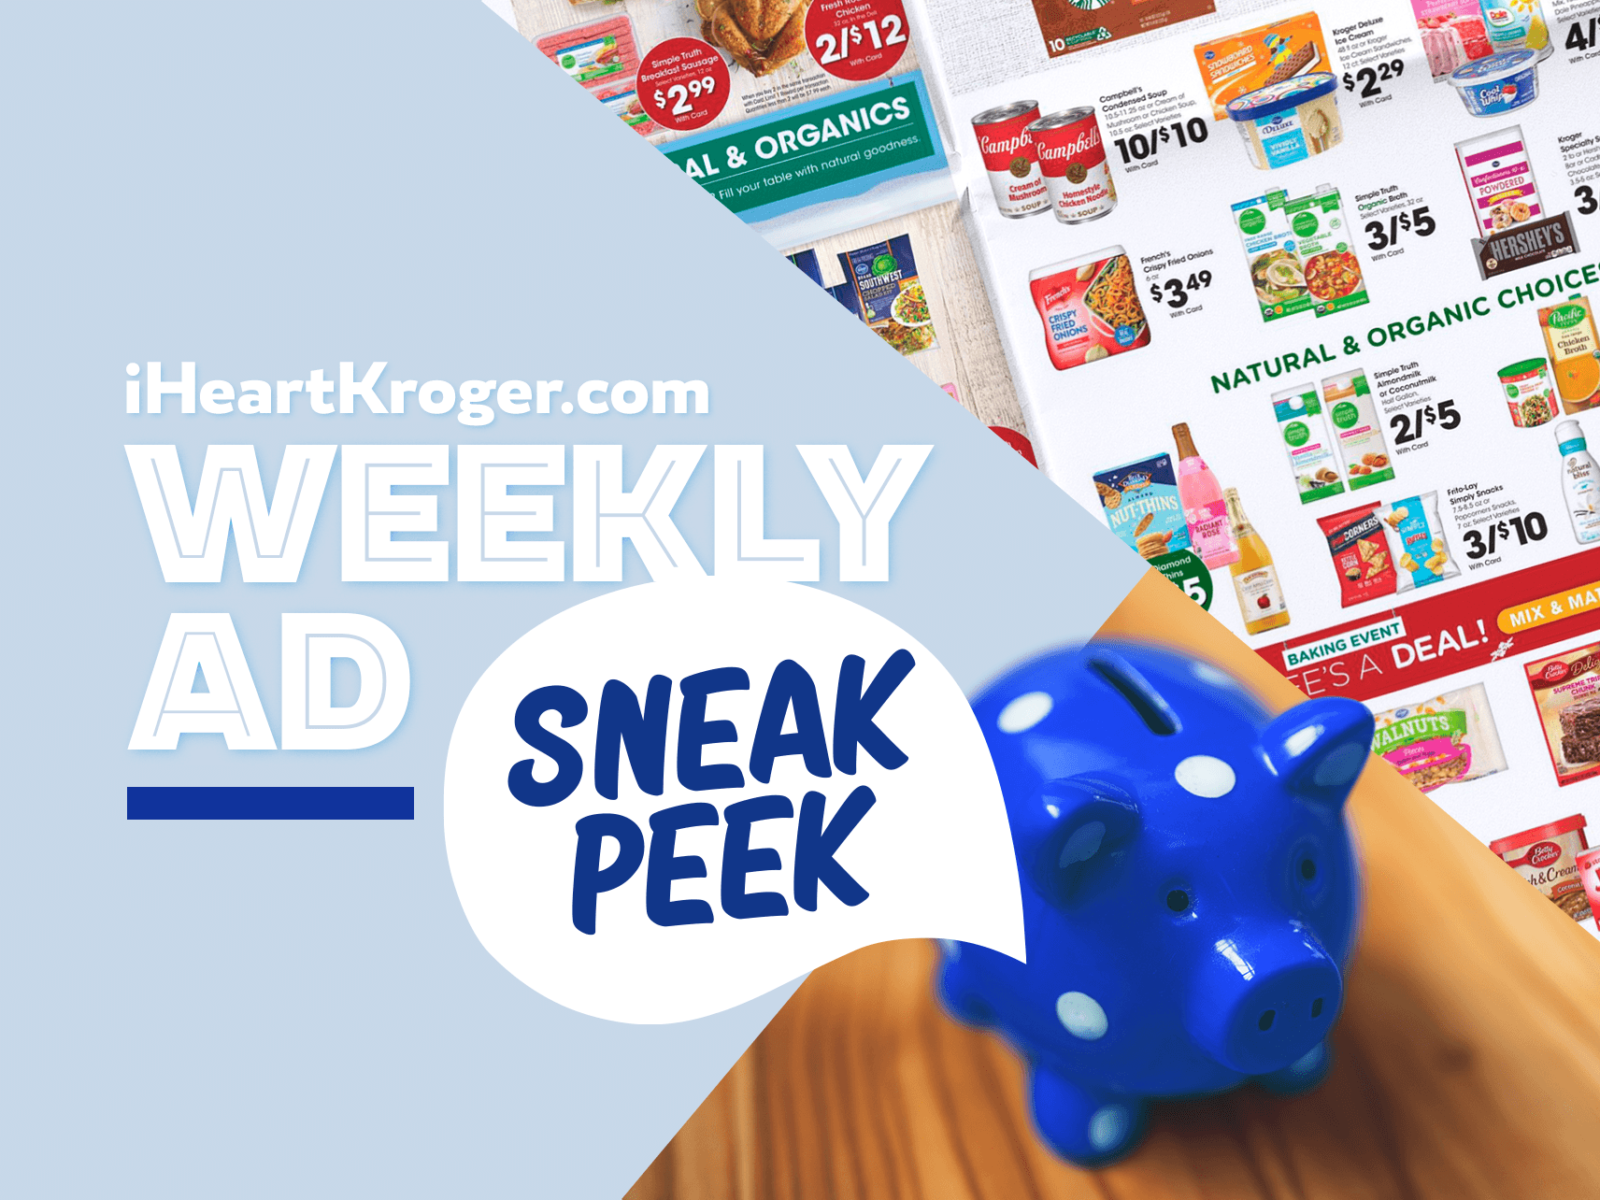 Kroger Ad & Coupons Week Of 7/13 to 7/19 – Mega Sale Continues